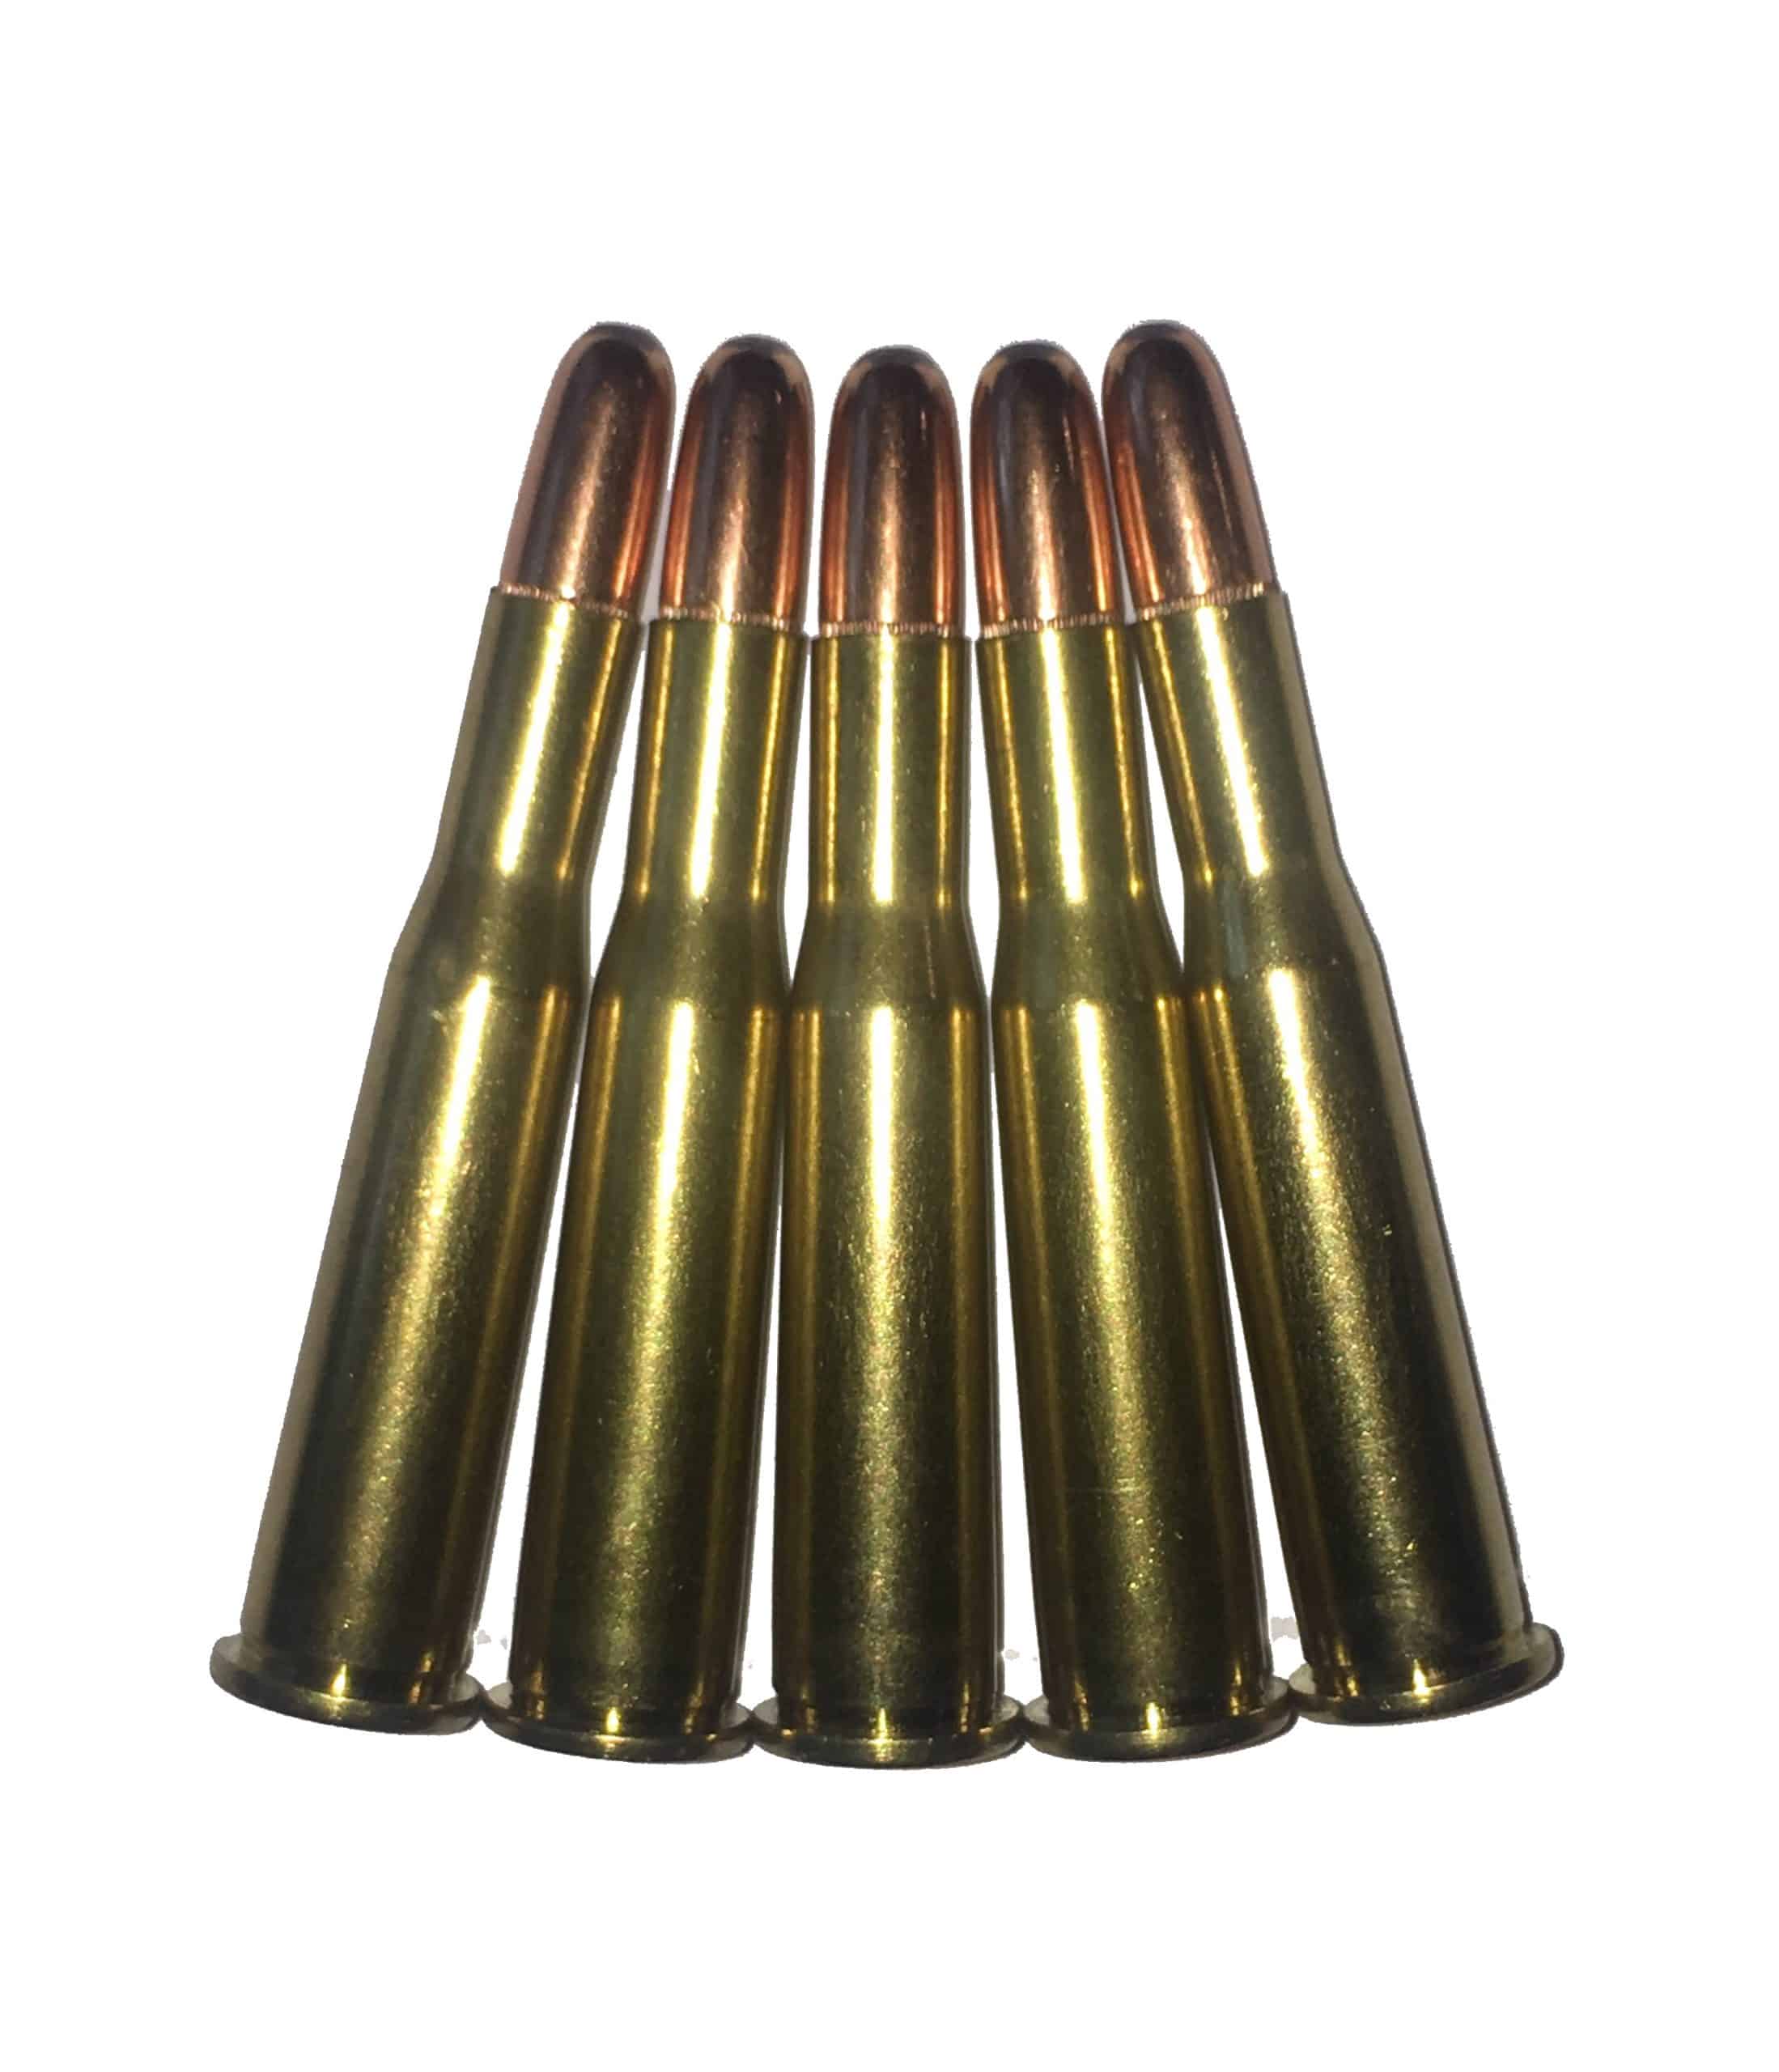 Dummy Rounds / Snap Caps / Fake Bullets -  Snap Caps Dummy  Rounds